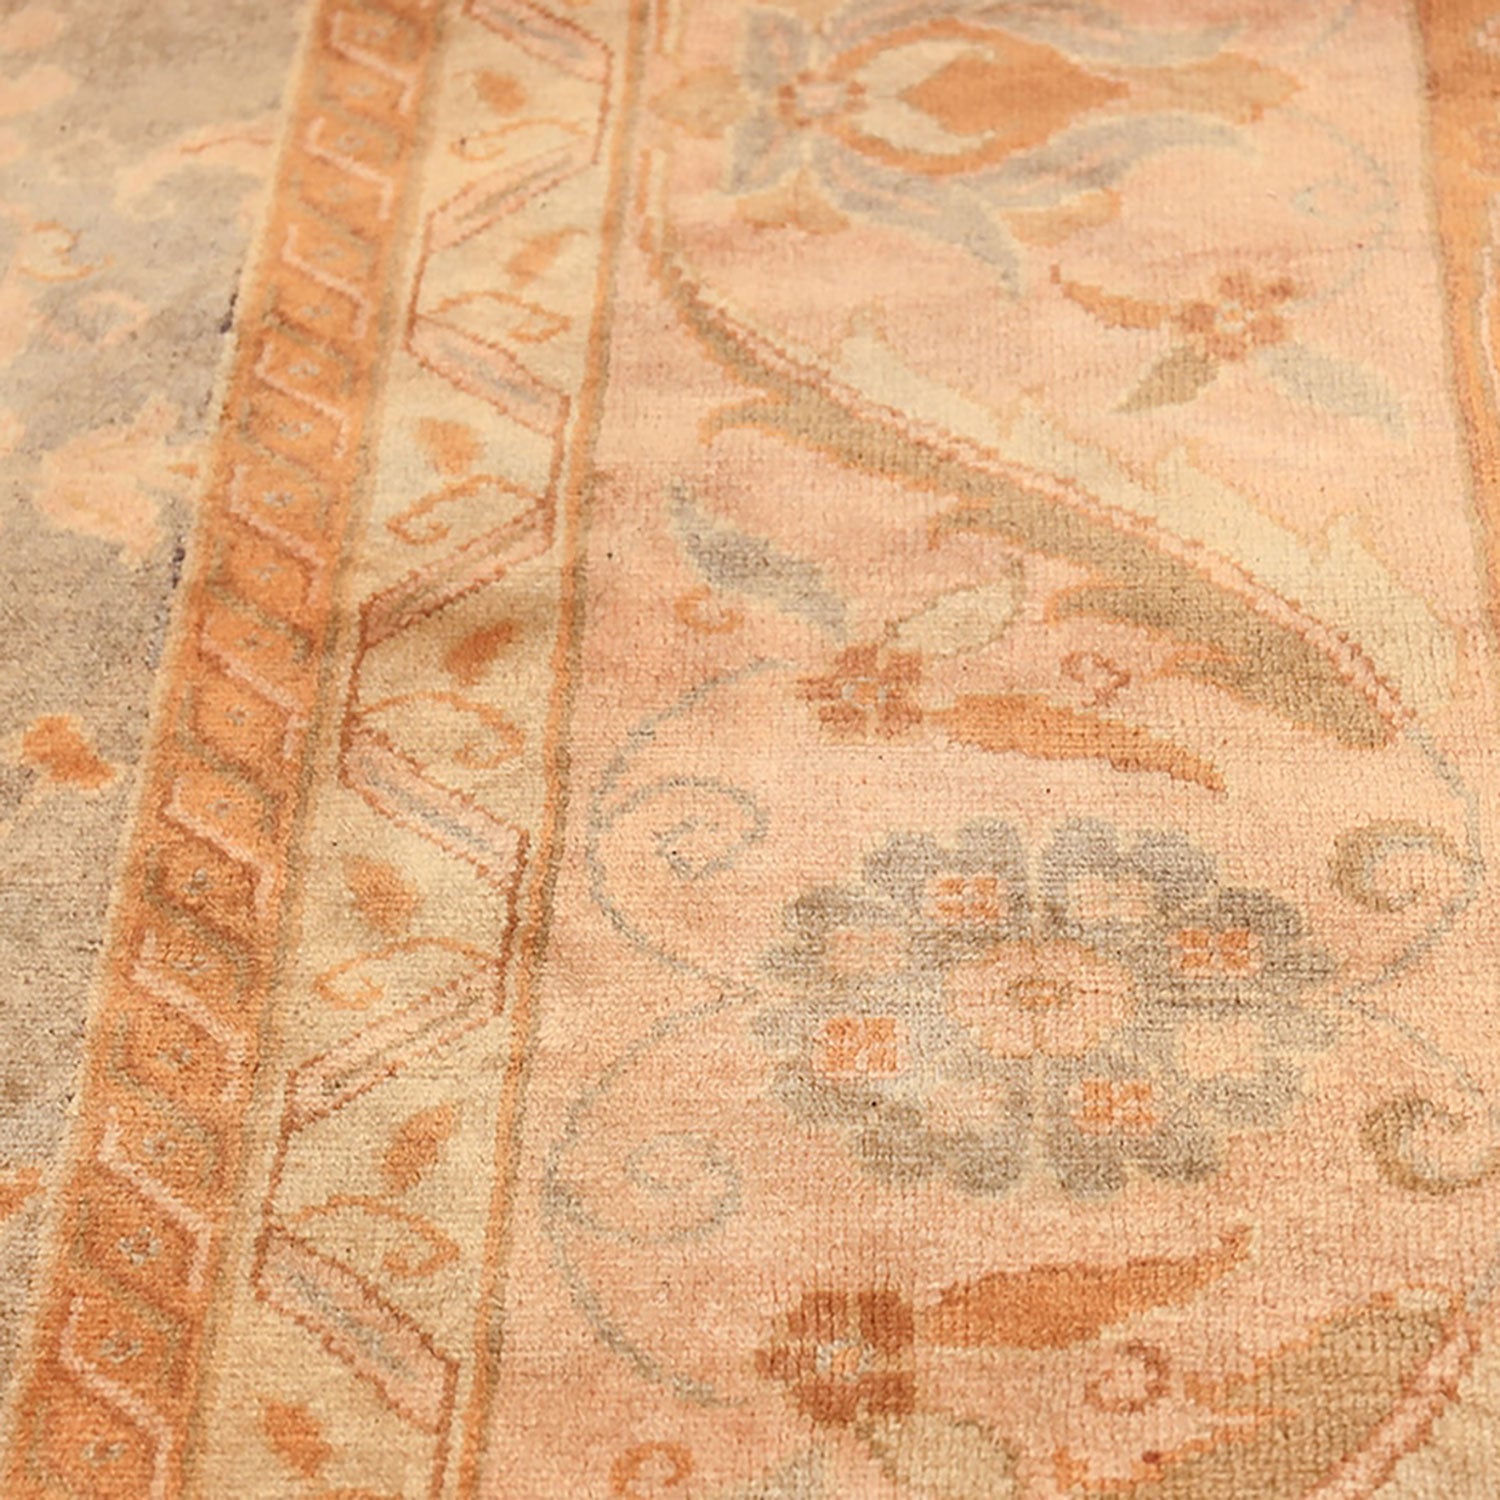 Vintage-style carpet with geometric border and faded floral motif.